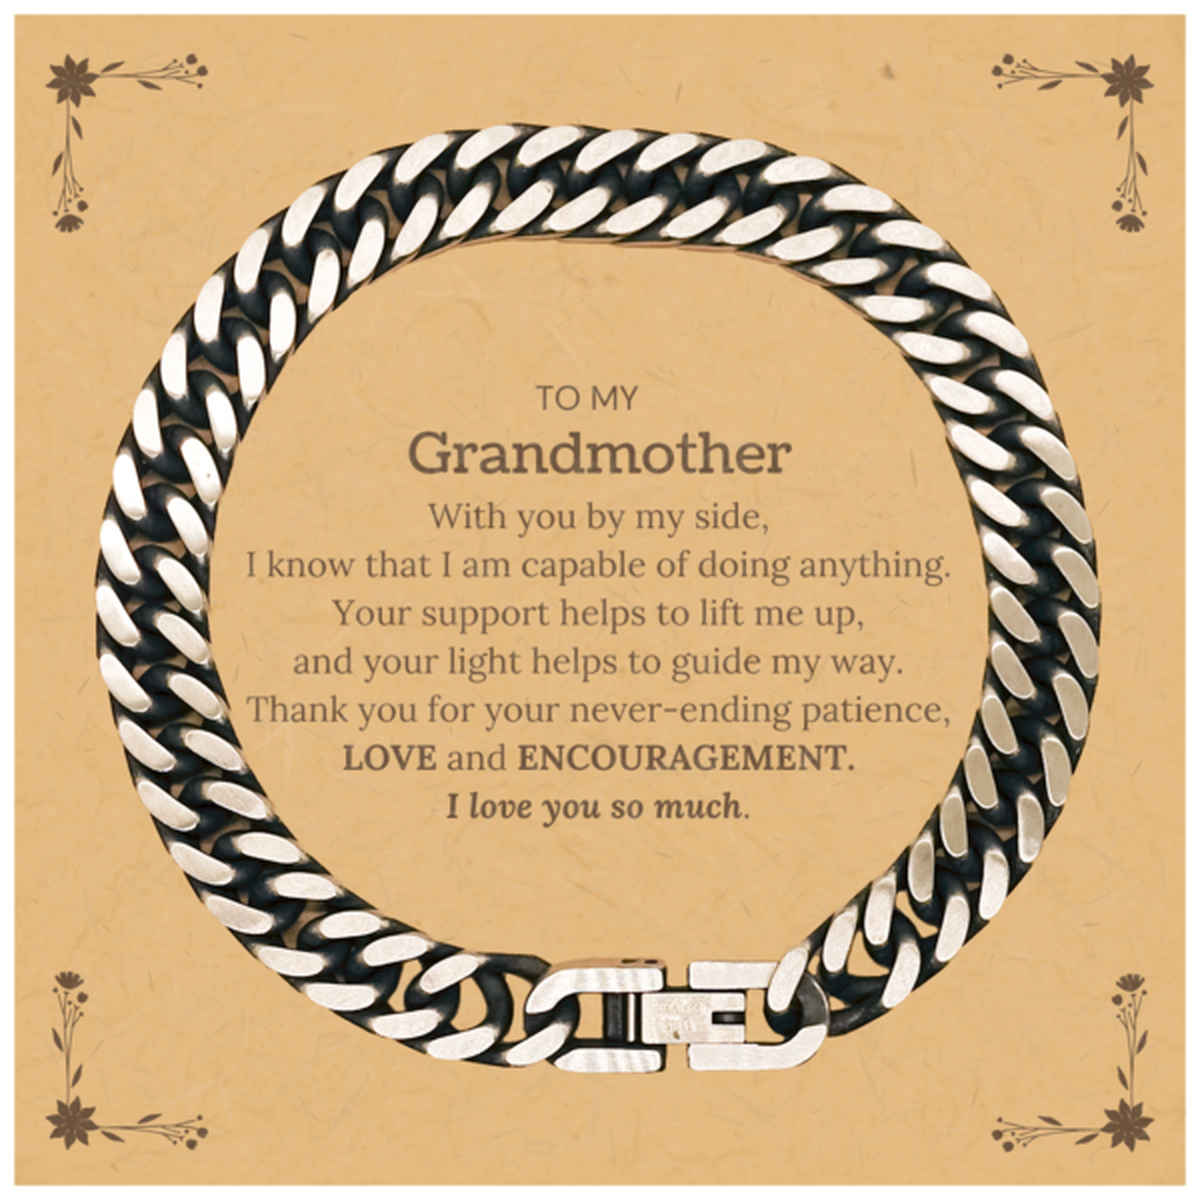 Appreciation Grandmother Cuban Link Chain Bracelet Gifts, To My Grandmother Birthday Christmas Wedding Keepsake Gifts for Grandmother With you by my side, I know that I am capable of doing anything. I love you so much